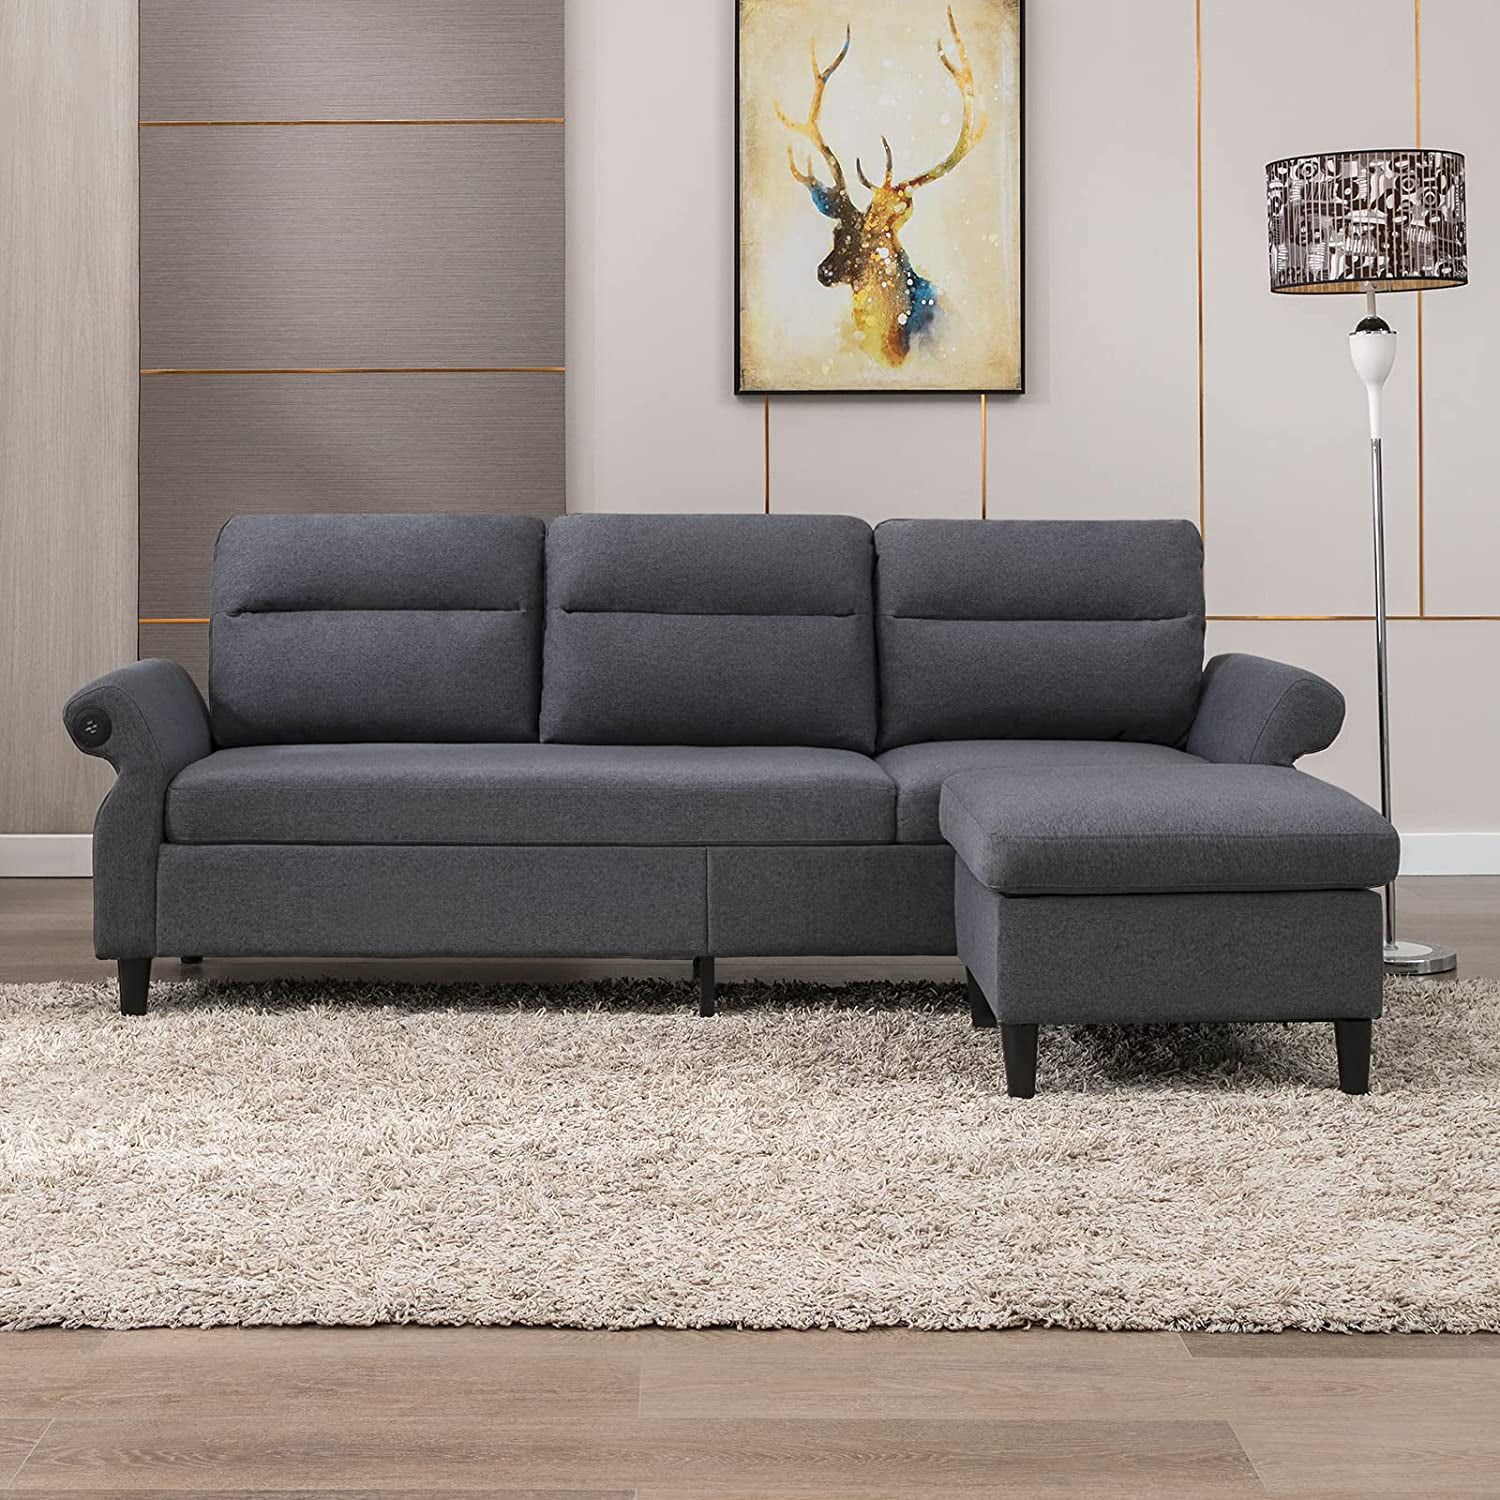 Mjkone Modern 88" W Convertible Sectional Sofa Couch With 2 Usb Ports And  Adjustable Armres,3 Seat L Shape Sofa Couch With,Ottoman For Living  Room,Apartment , Linen Fabric,Dark Grey – Walmart For 3 Seat L Shape Sofa Couches With 2 Usb Ports (View 7 of 15)